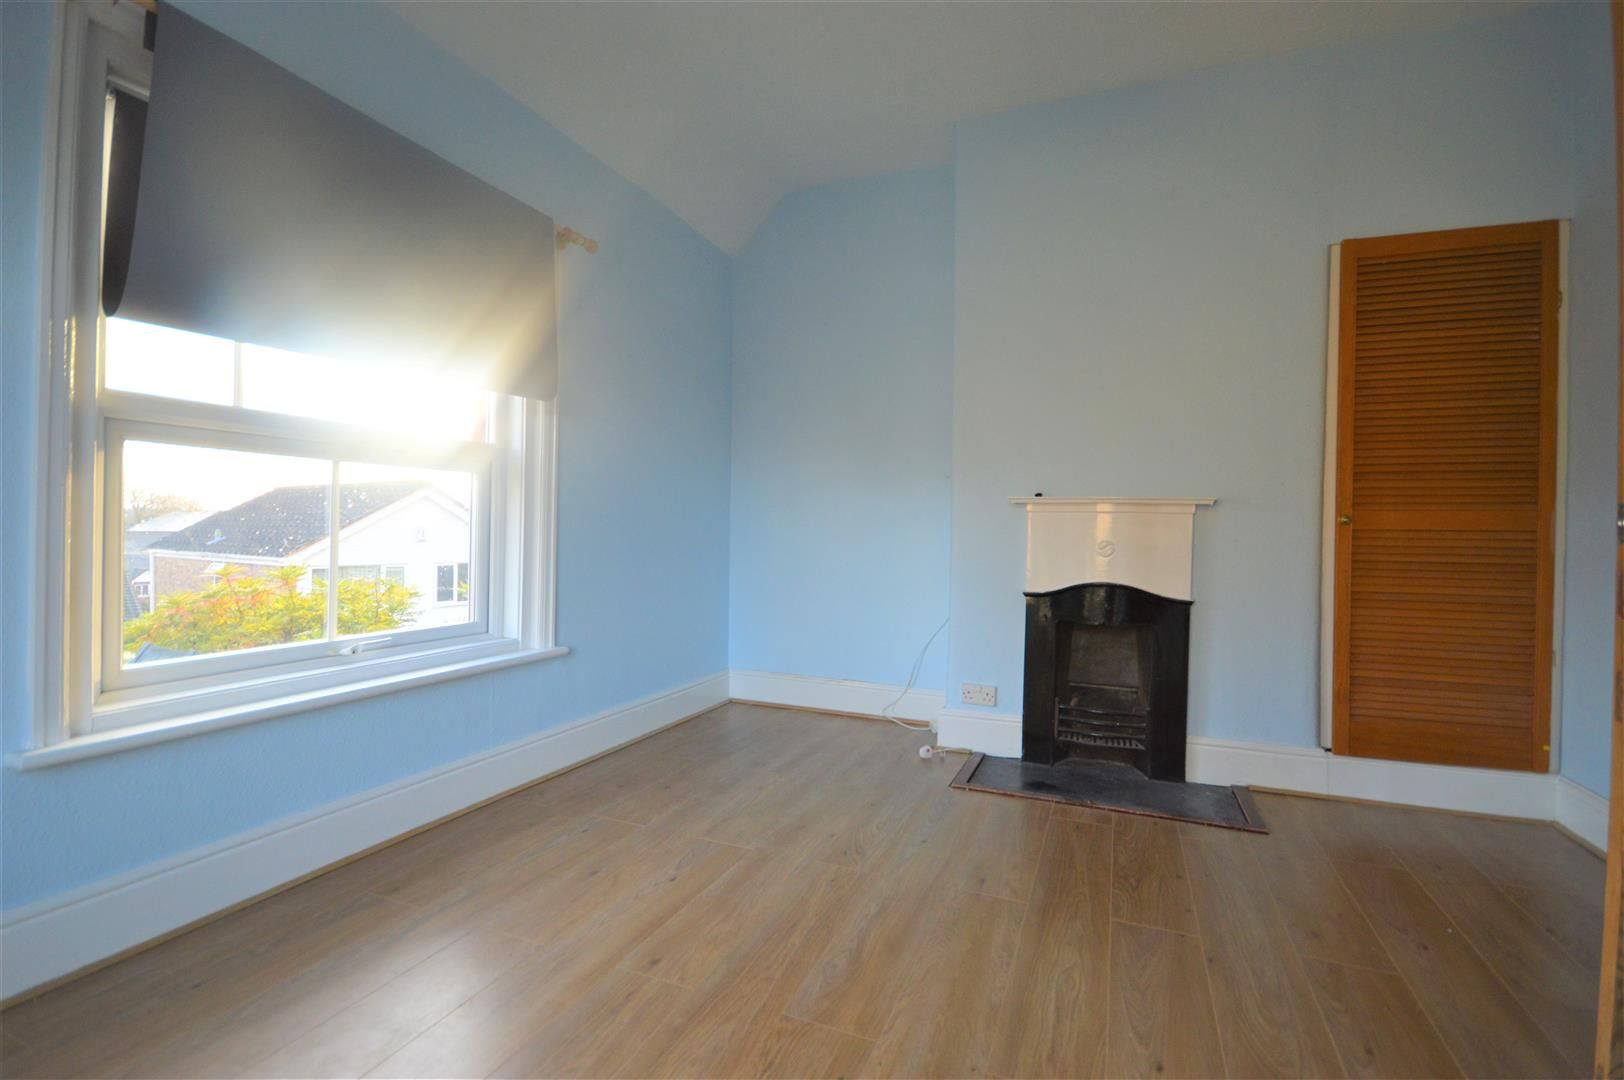 3 bed end of terrace for sale in Leominster 7